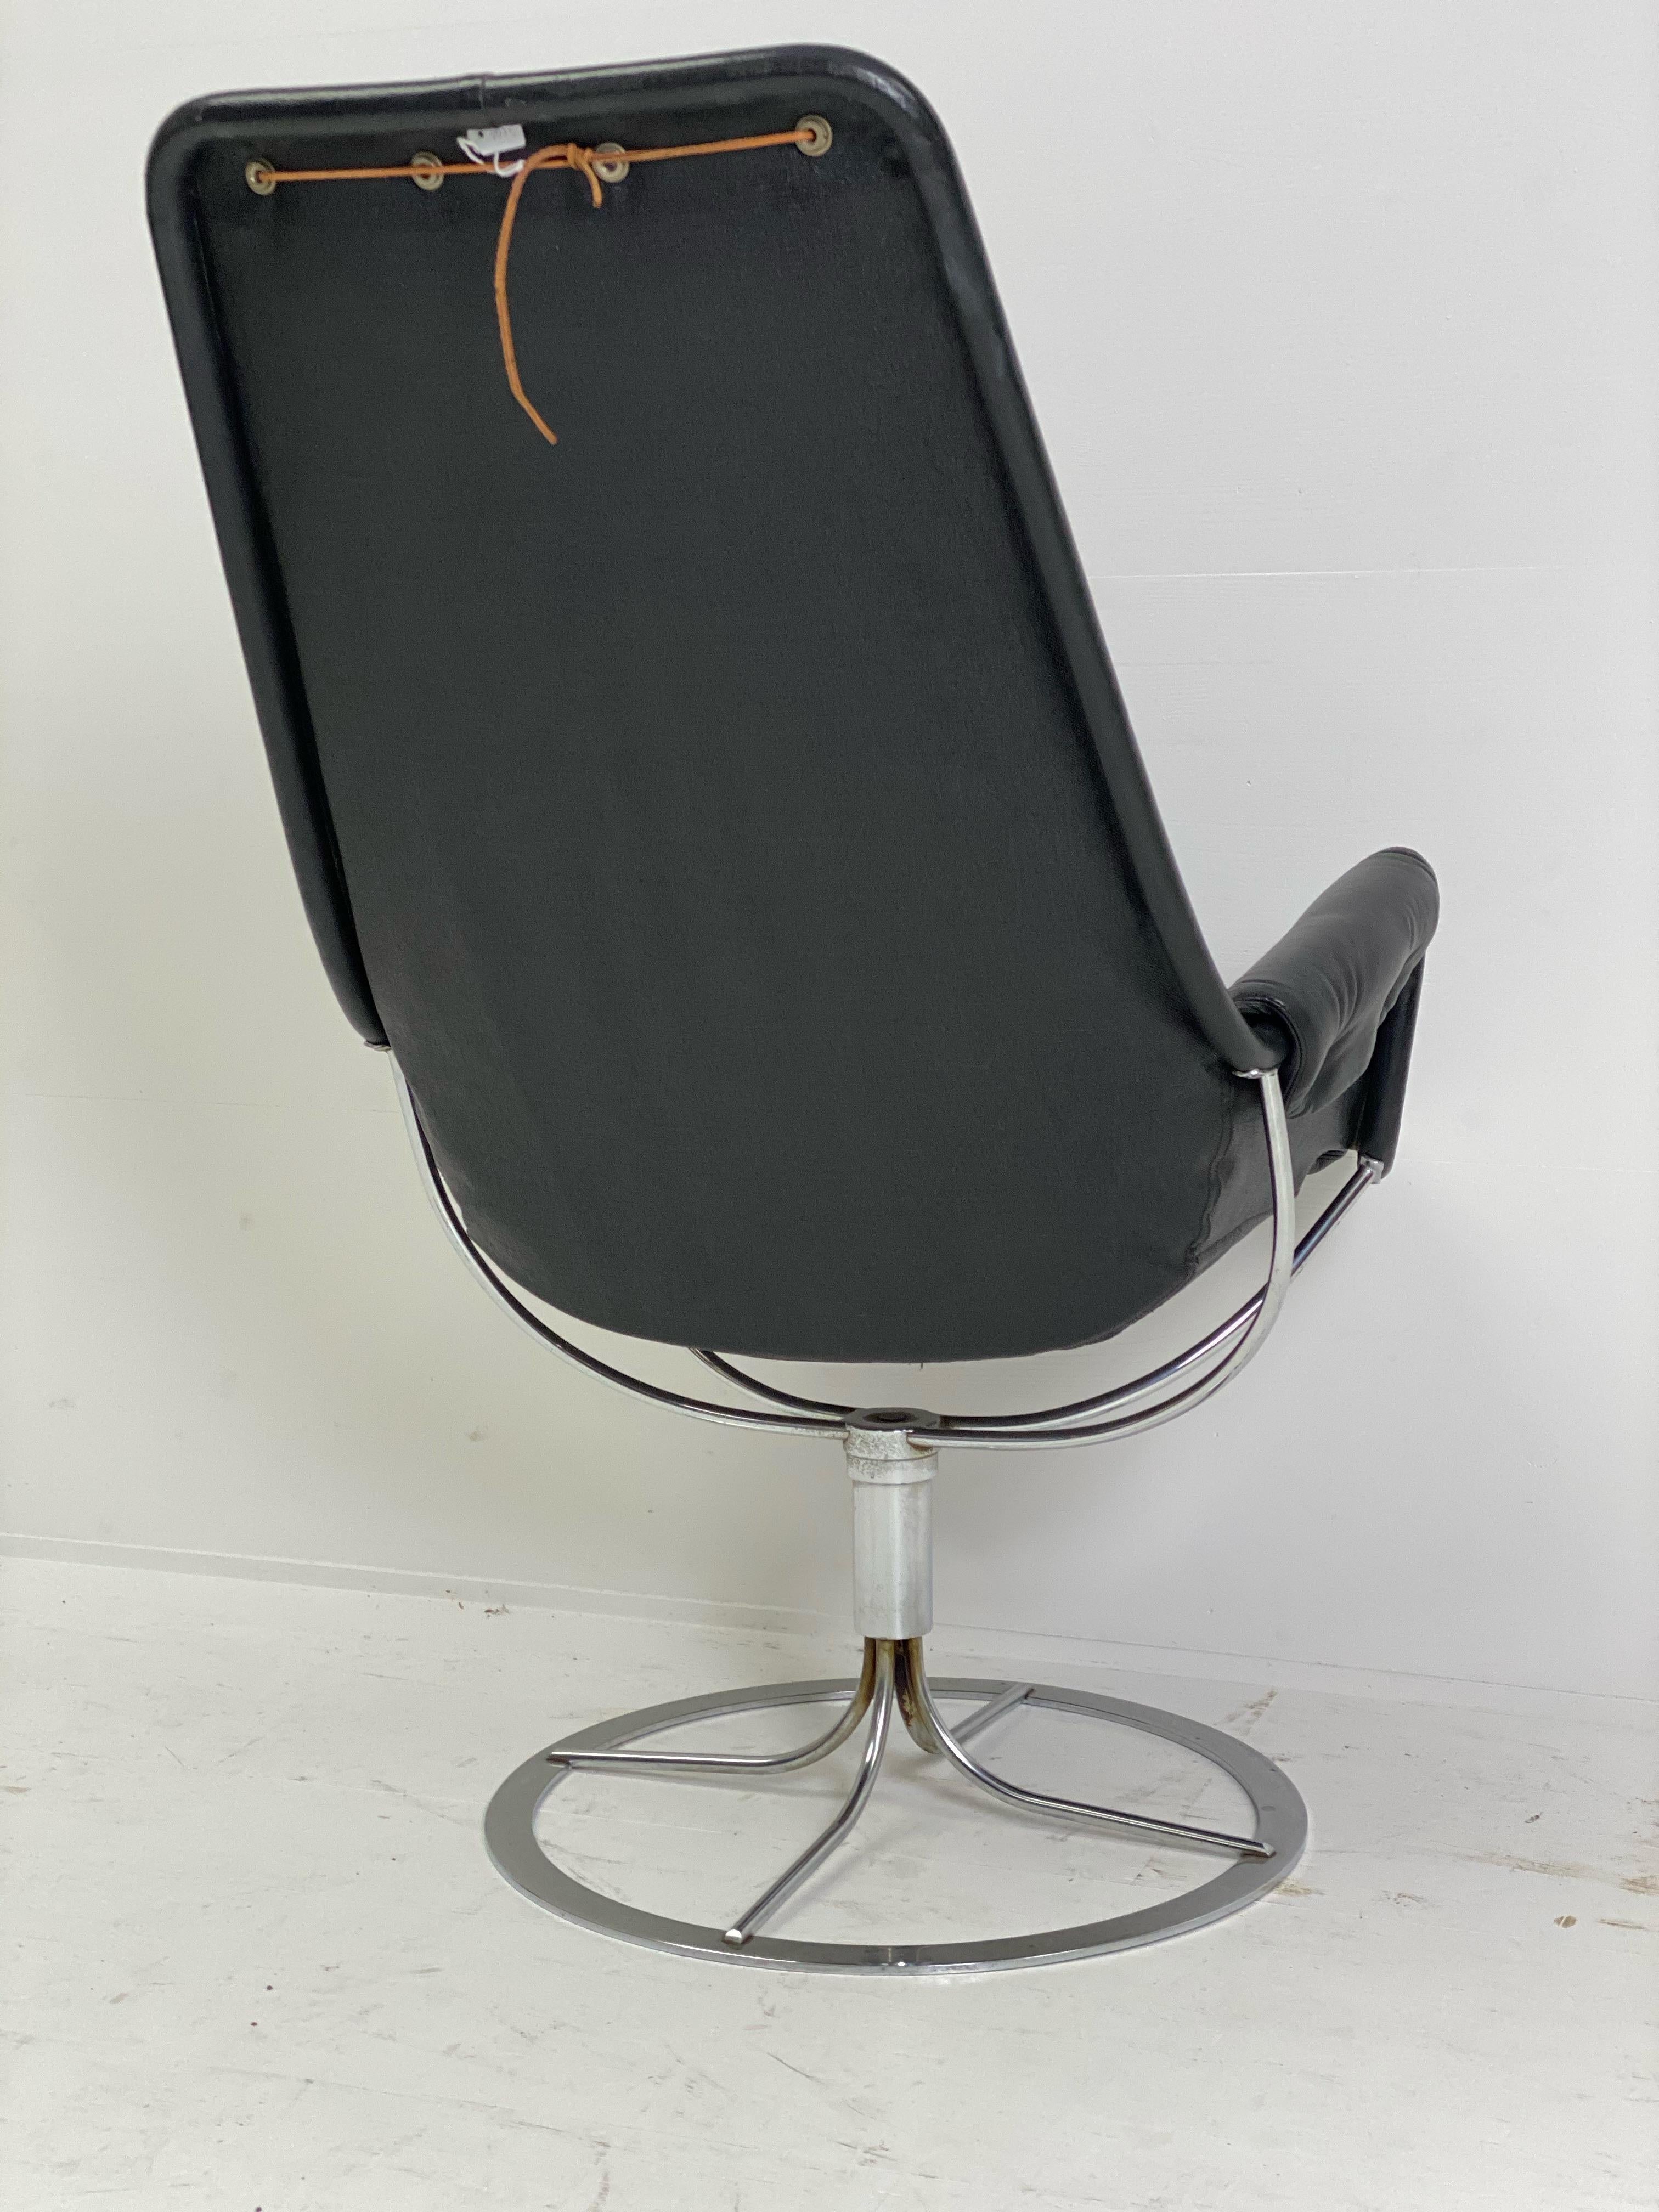 Patinated Vintage Jetson High Back Swivel Lounge Chair in black leather by Bruno Mathsson. For Sale